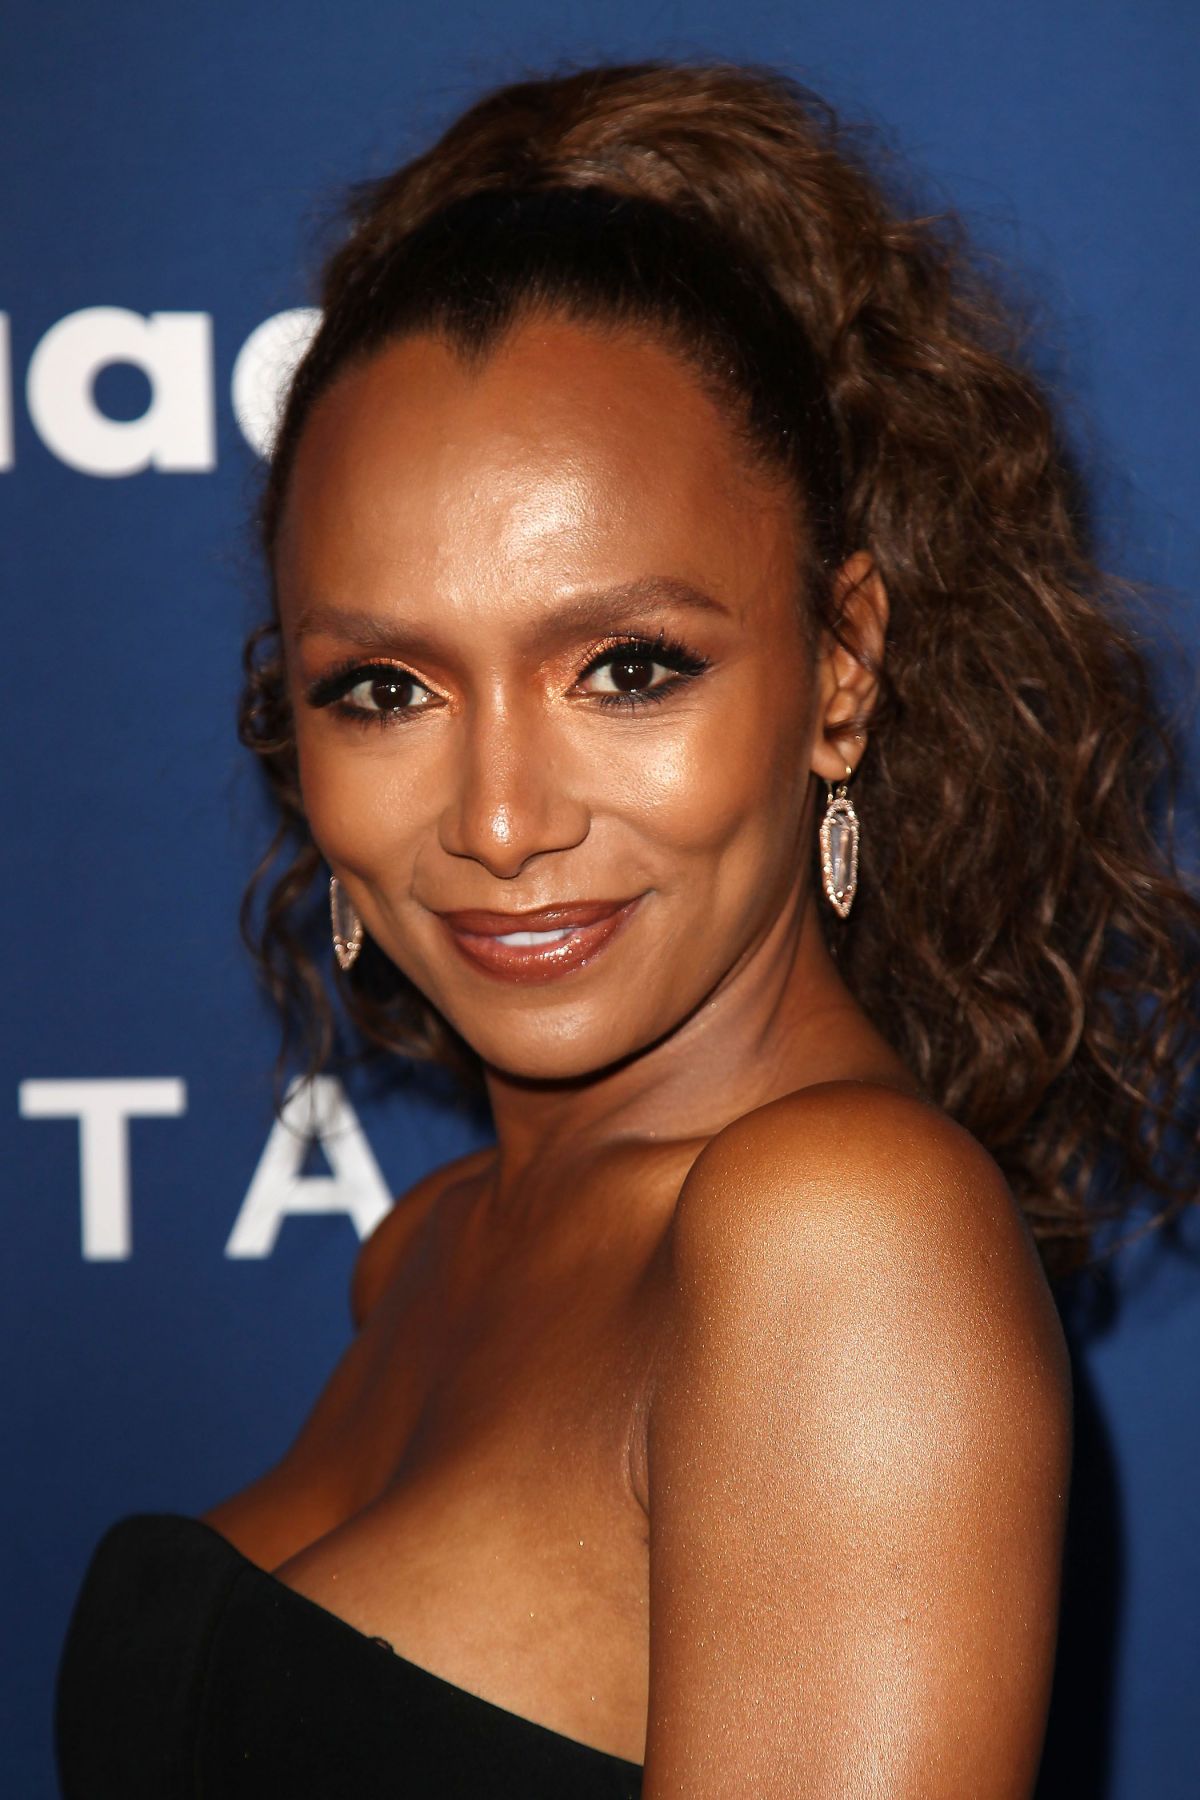 Download JANET MOCK at 2018 Glaad Media Awards in New York 05/05 ...